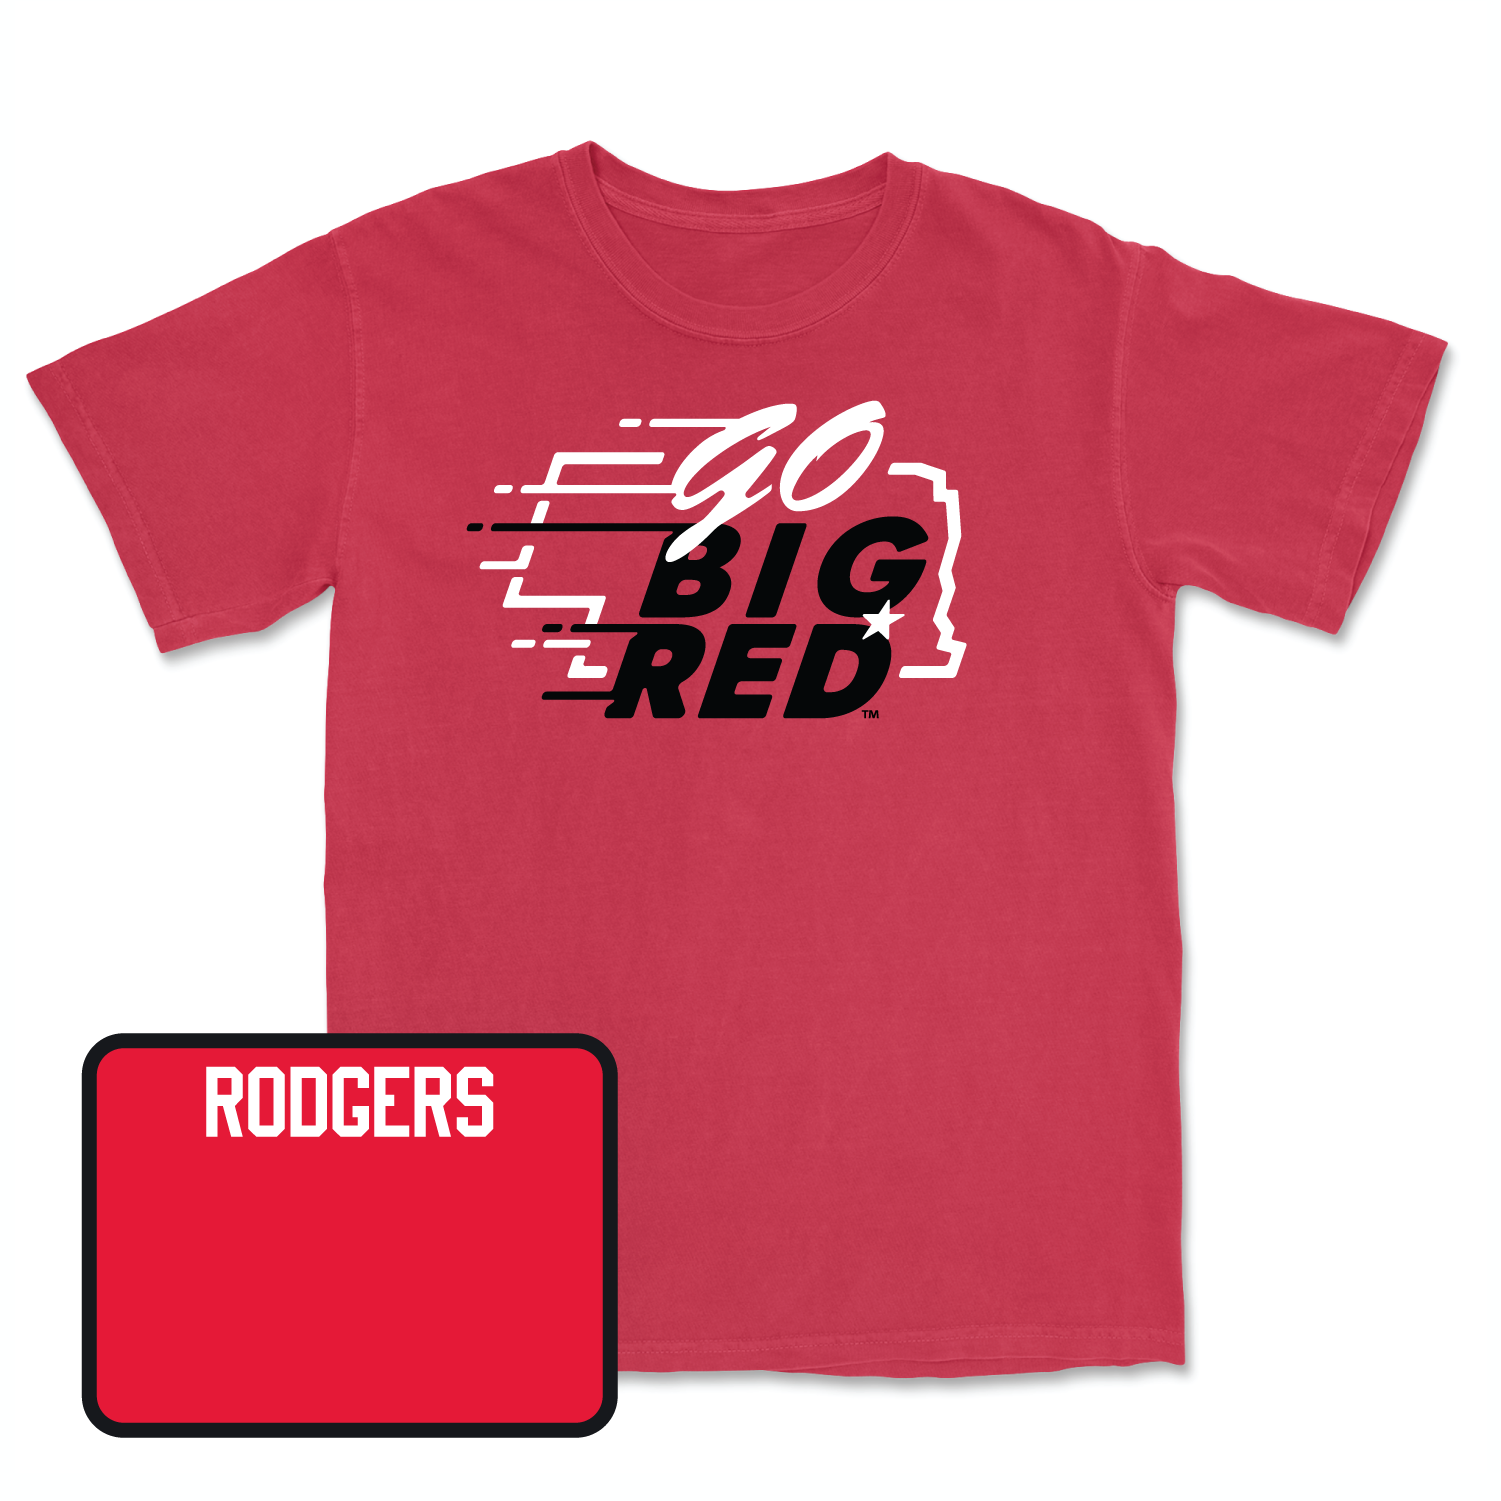 Red Track & Field GBR Tee Youth Medium / Omar Rodgers